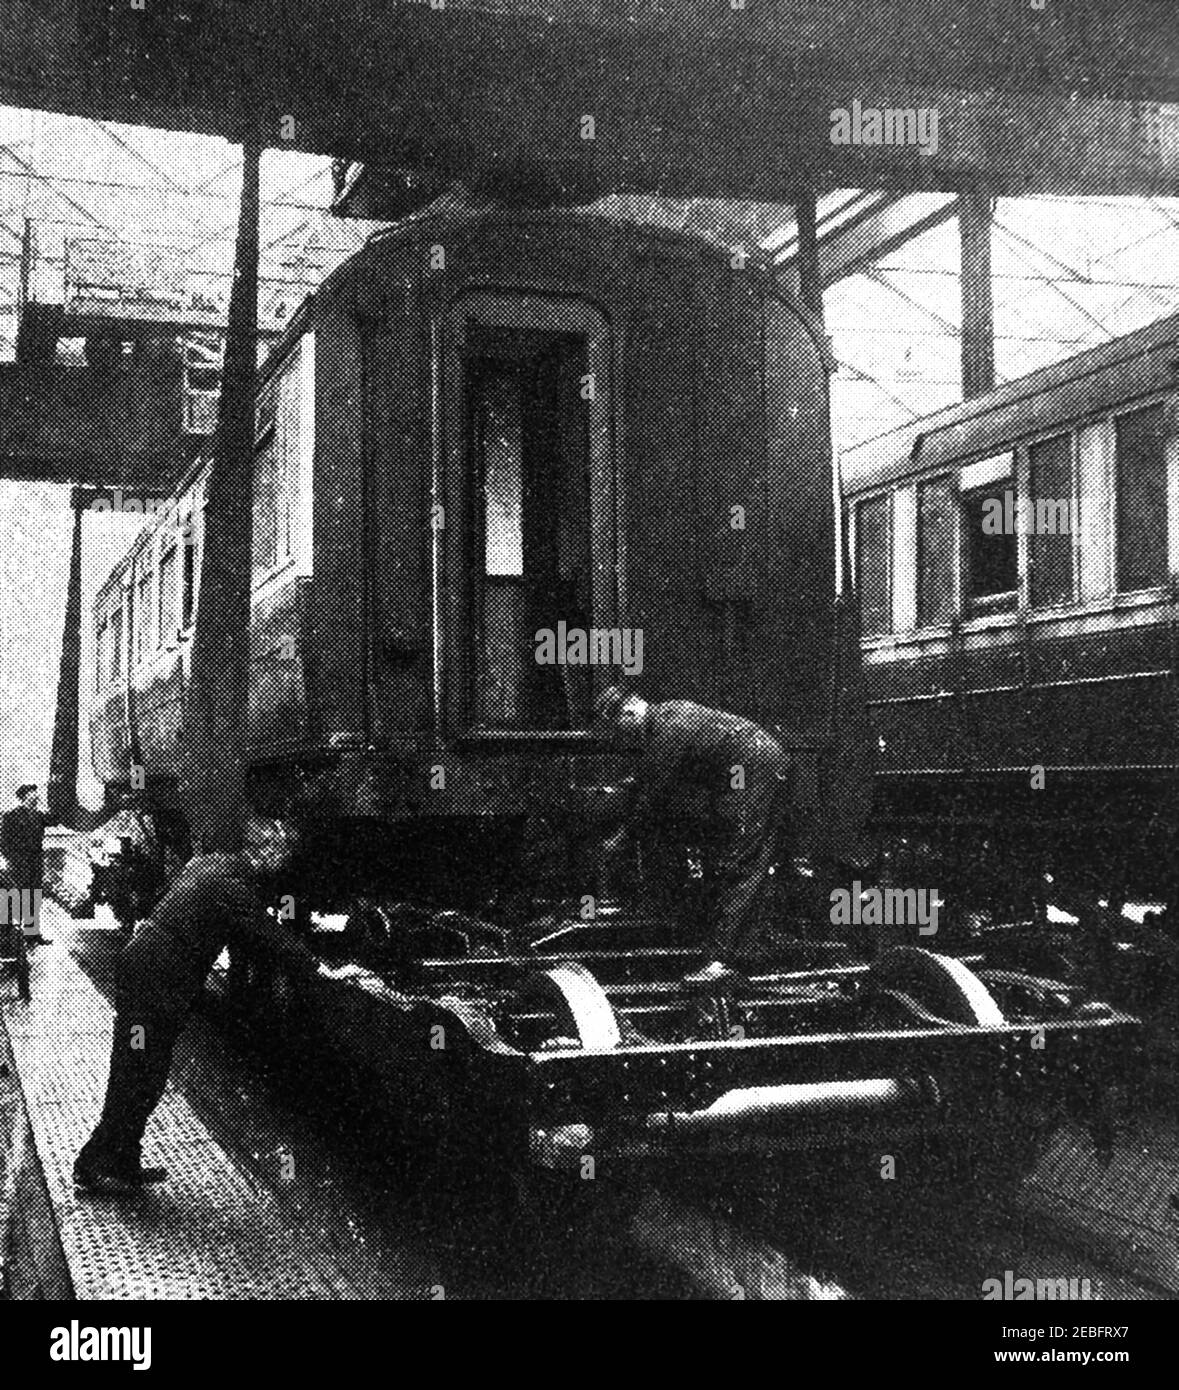 An early photograph of a carriage being lowered onto its wheels at the the Railway Locomotive carriage works at Doncaster, England. Doncaster railway works  located in the town of Doncaster, South Yorkshire, England. replaced an earlier works at Boston and Peterborough. Like other factories it was comandeered during WWII to make other items like  Horsa gliders for the D-Day  airborne assault. The carriage building shop was destroyed by ire in 1940, the new buildings built in 1949 were designed to fit  the British Railways standard all steel carriages. Steam train construction finished in 1962. Stock Photo